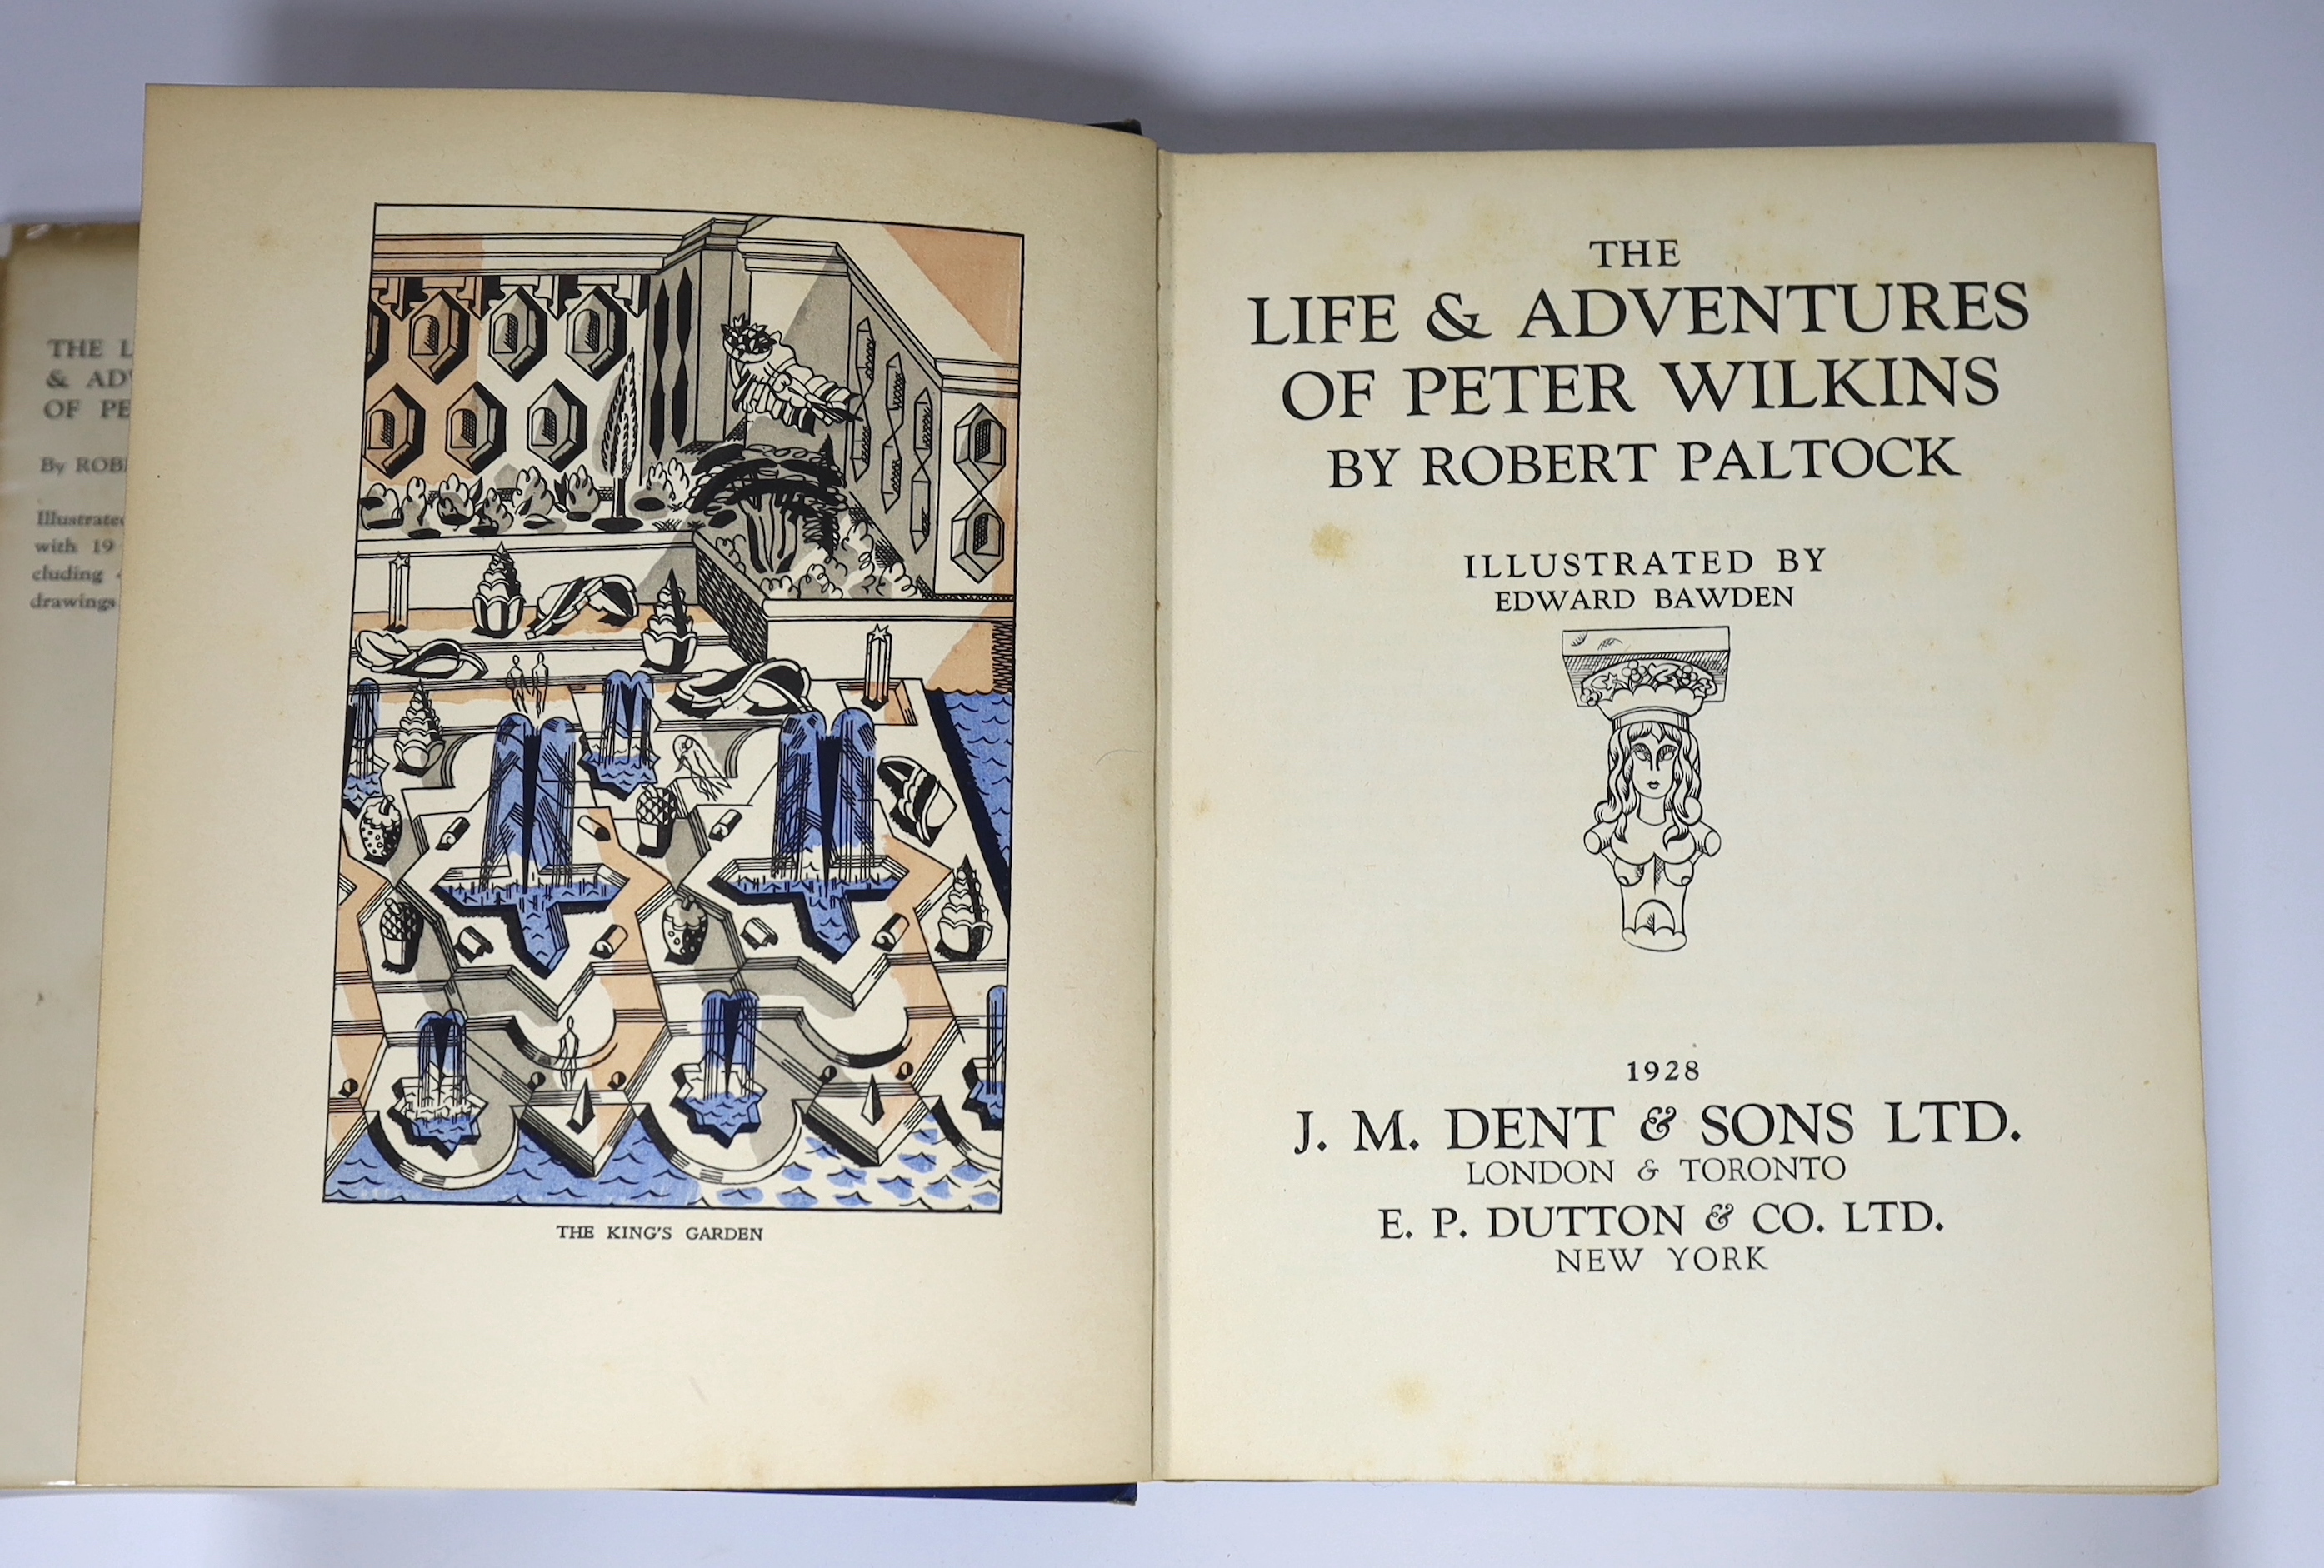 Bawden, Edward first book as illustrator - Paltock, Peter - The Life and Adventures of Peter Wilkins, 4to, blue cloth gilt in a torn d/j, with loss, with 19 coloured stencil illustrations, 5 being full page, 4 double-pag